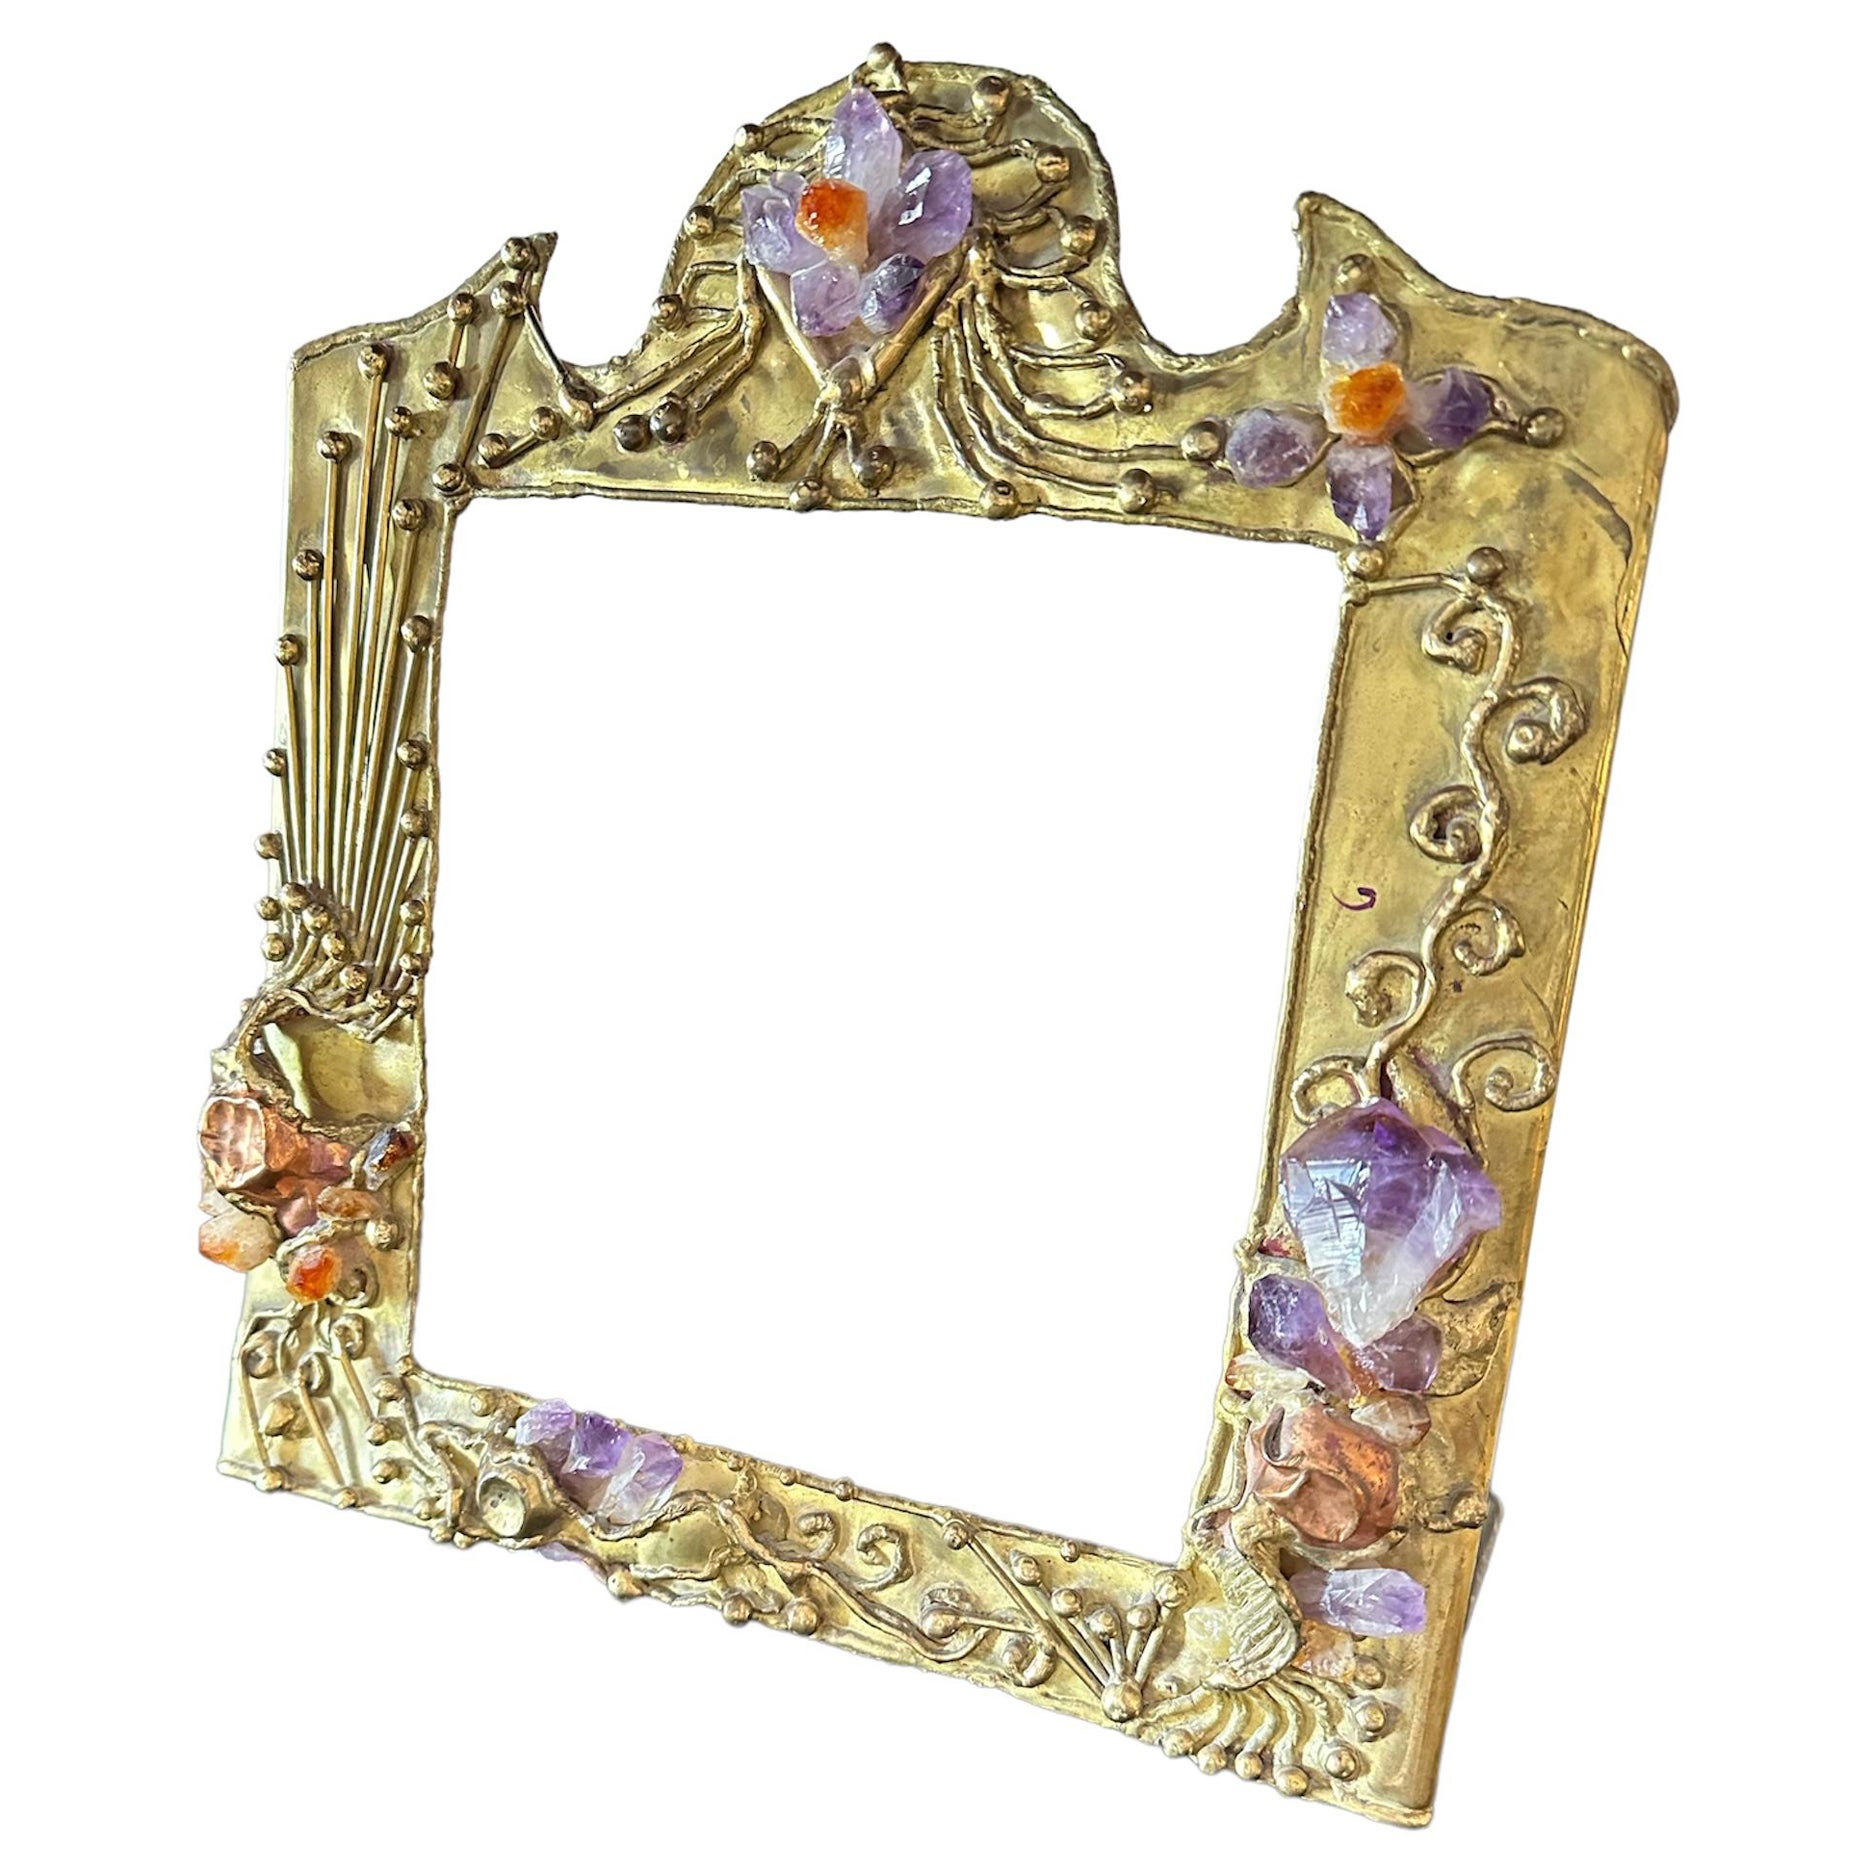 Sculptural Frame, Jeweled Brass Witamethyst, Quartz and Copper Accents